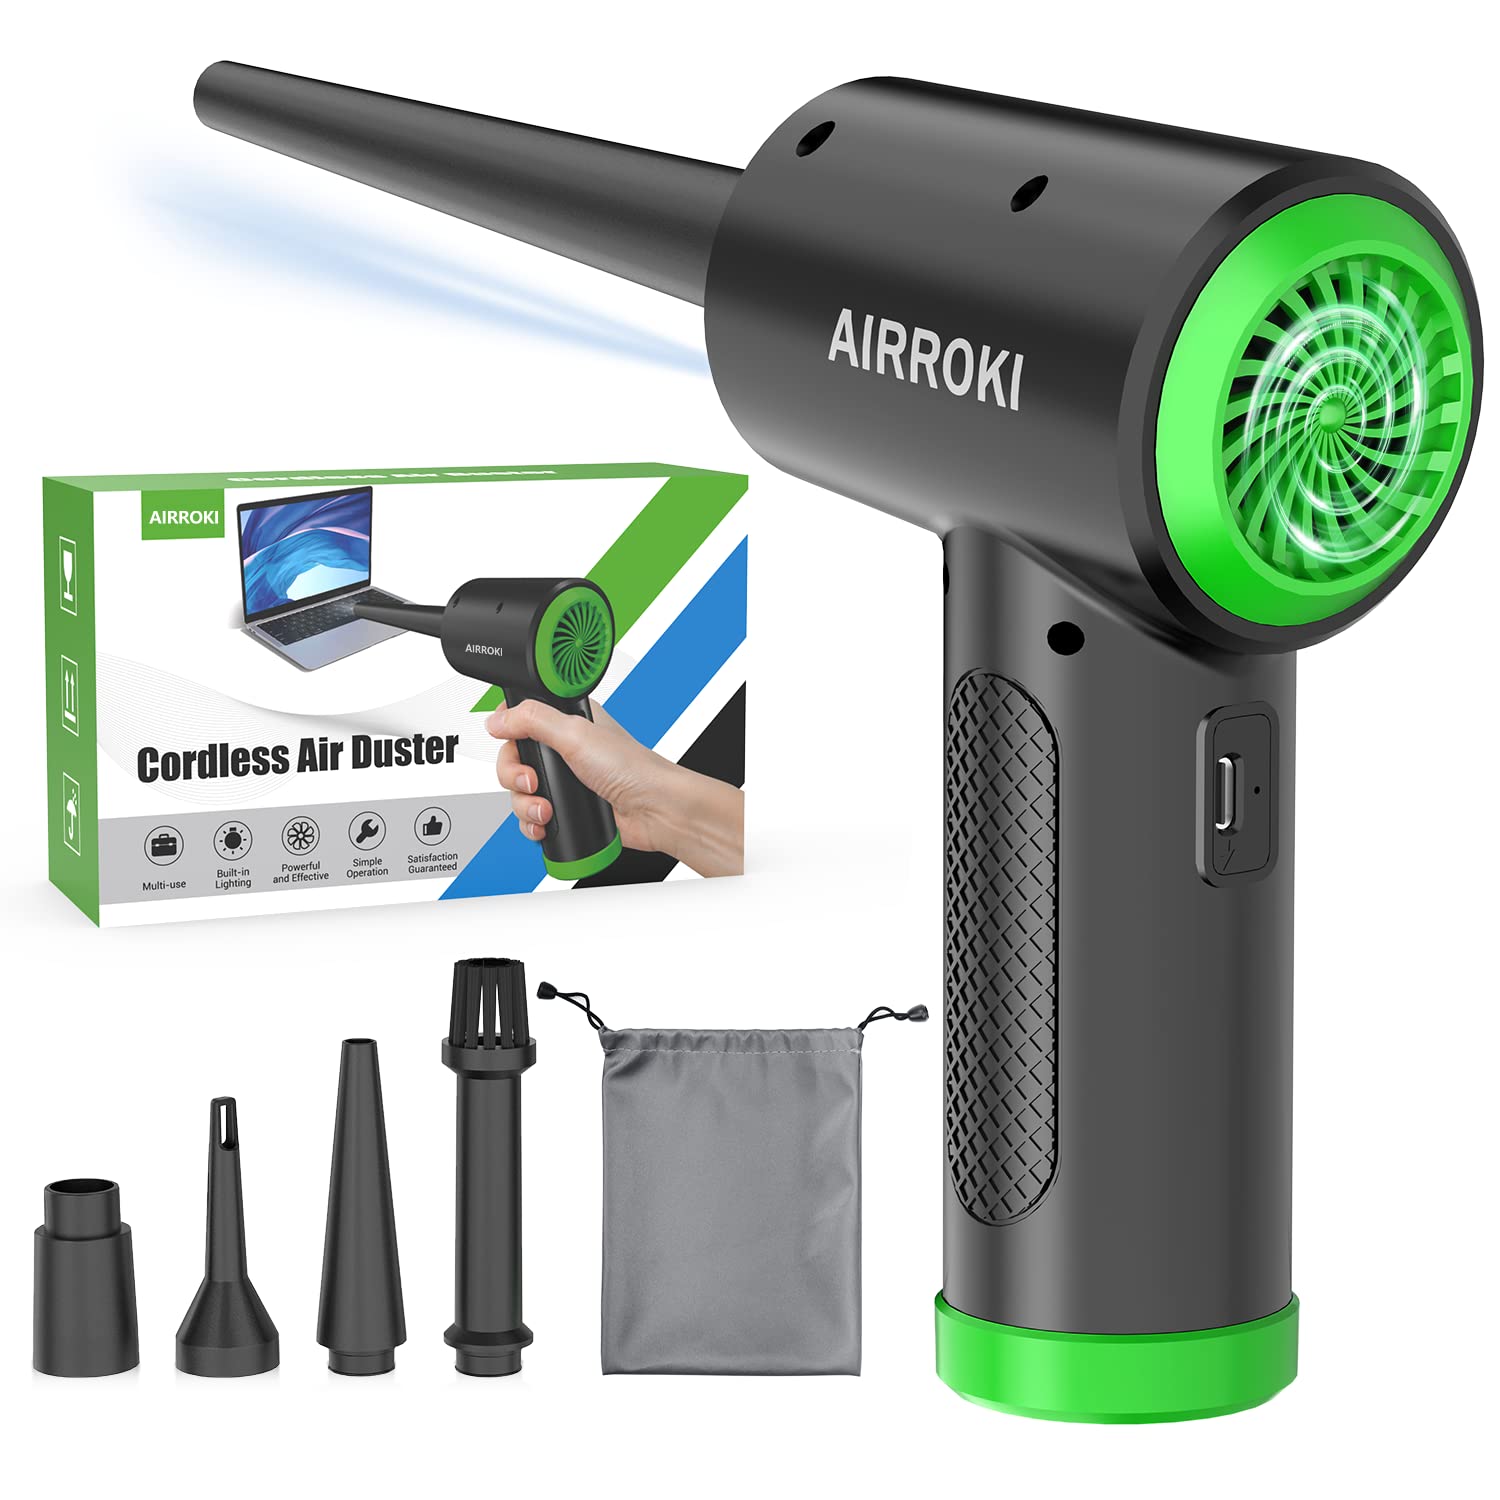 AIRROKI Compressed Air Duster - Electric Air Duster for Computers, 51000RPM Cordless Air Duster, Good Replace Compressed Air Can, 6000mAh Reusable no Canned Air Duster for PC Keyboard Cleaner